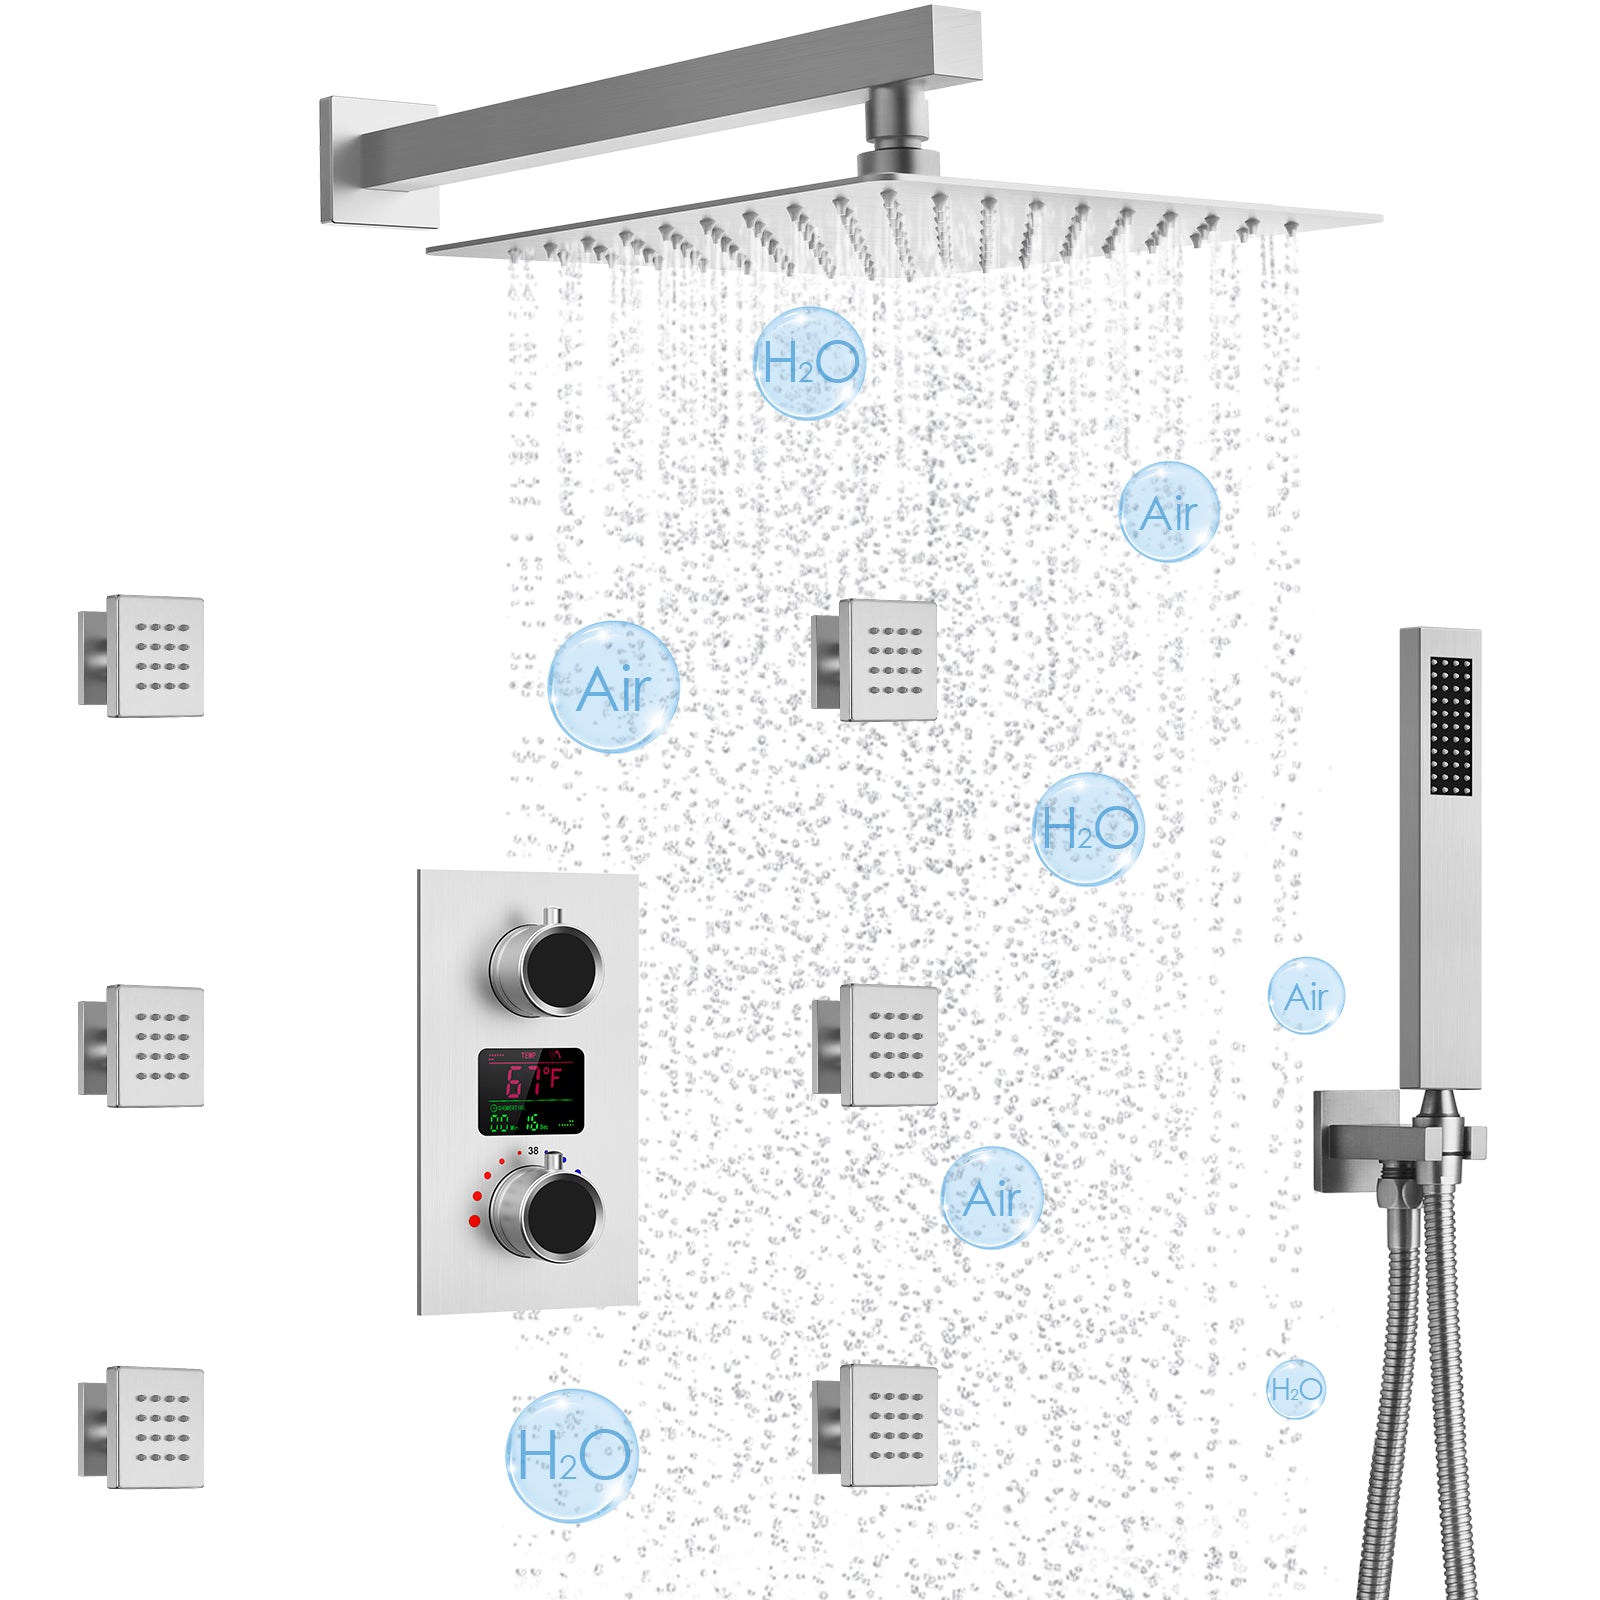 SFS-1014-NK12 EVERSTEIN Wall Mounted Constant Temperature Shower Faucet with LED Display Rain Shower System, with 6 Massage Nozzles and Hand-held Spray,Brushed Nickel